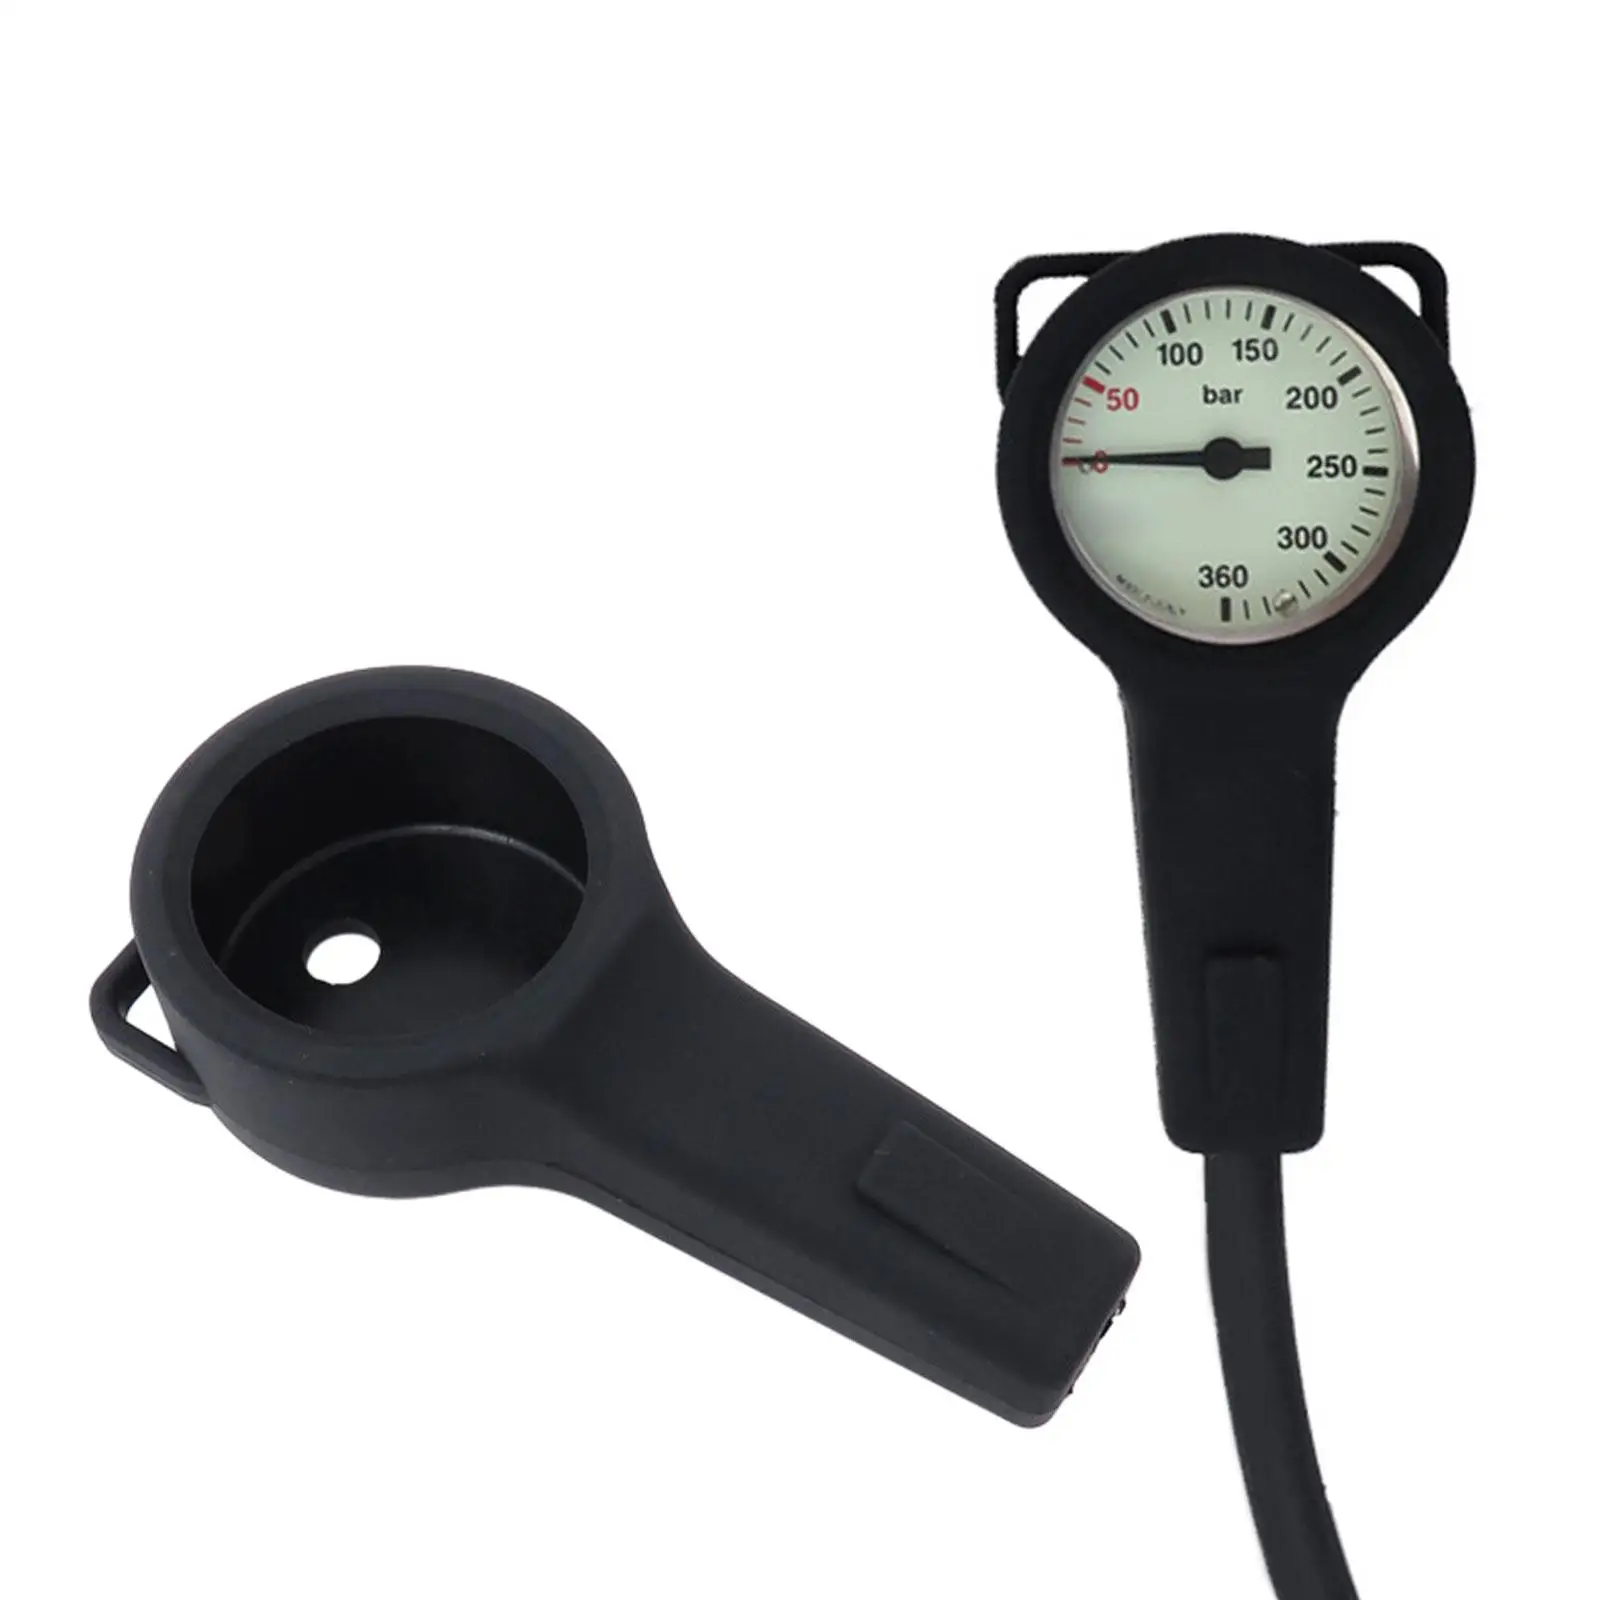 Scuba Pressure Gauge Boot with Loops Spg Protective Cover Convenient to Use